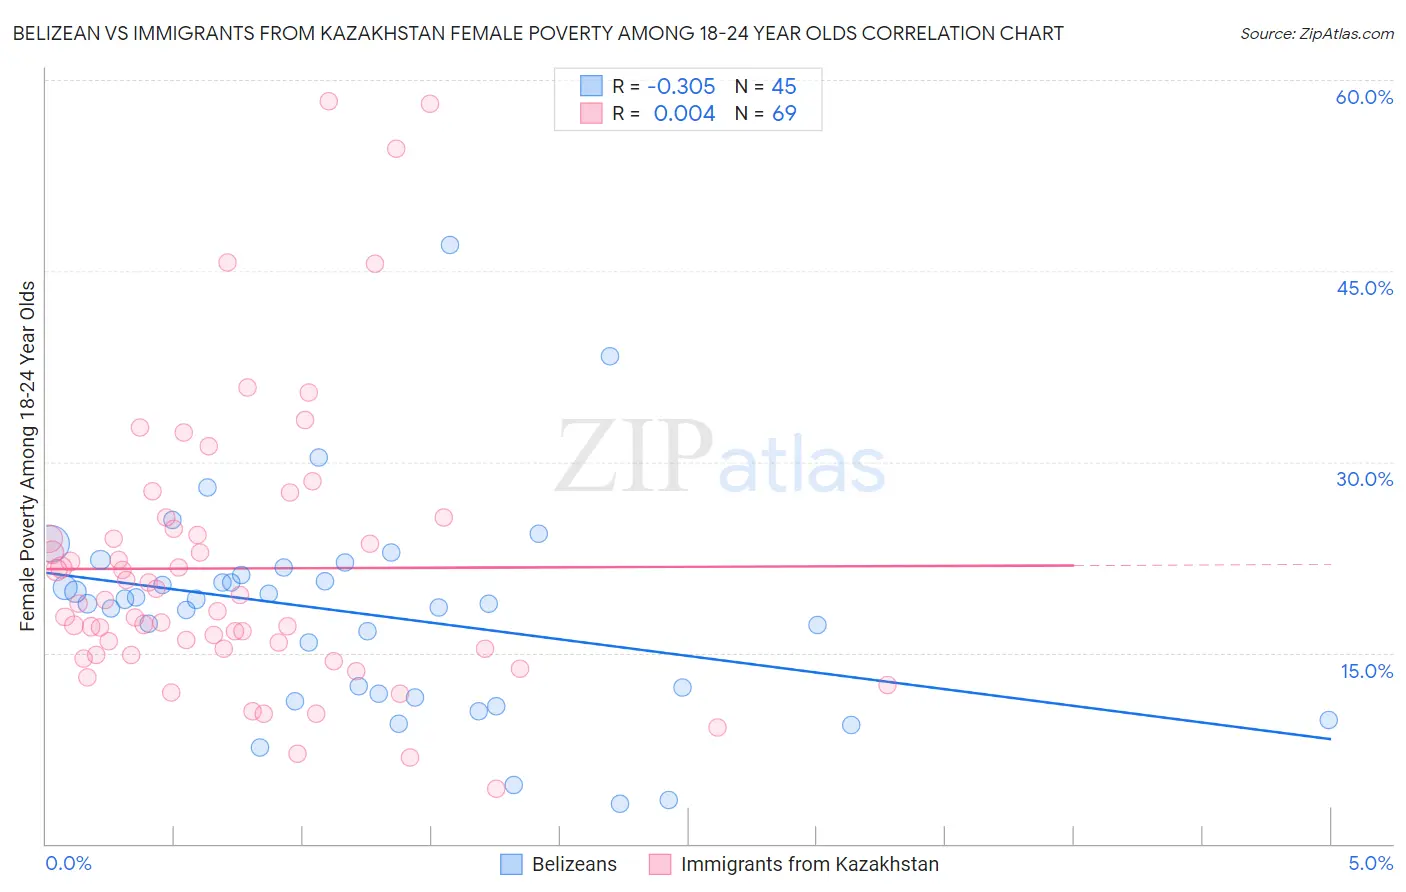 Belizean vs Immigrants from Kazakhstan Female Poverty Among 18-24 Year Olds